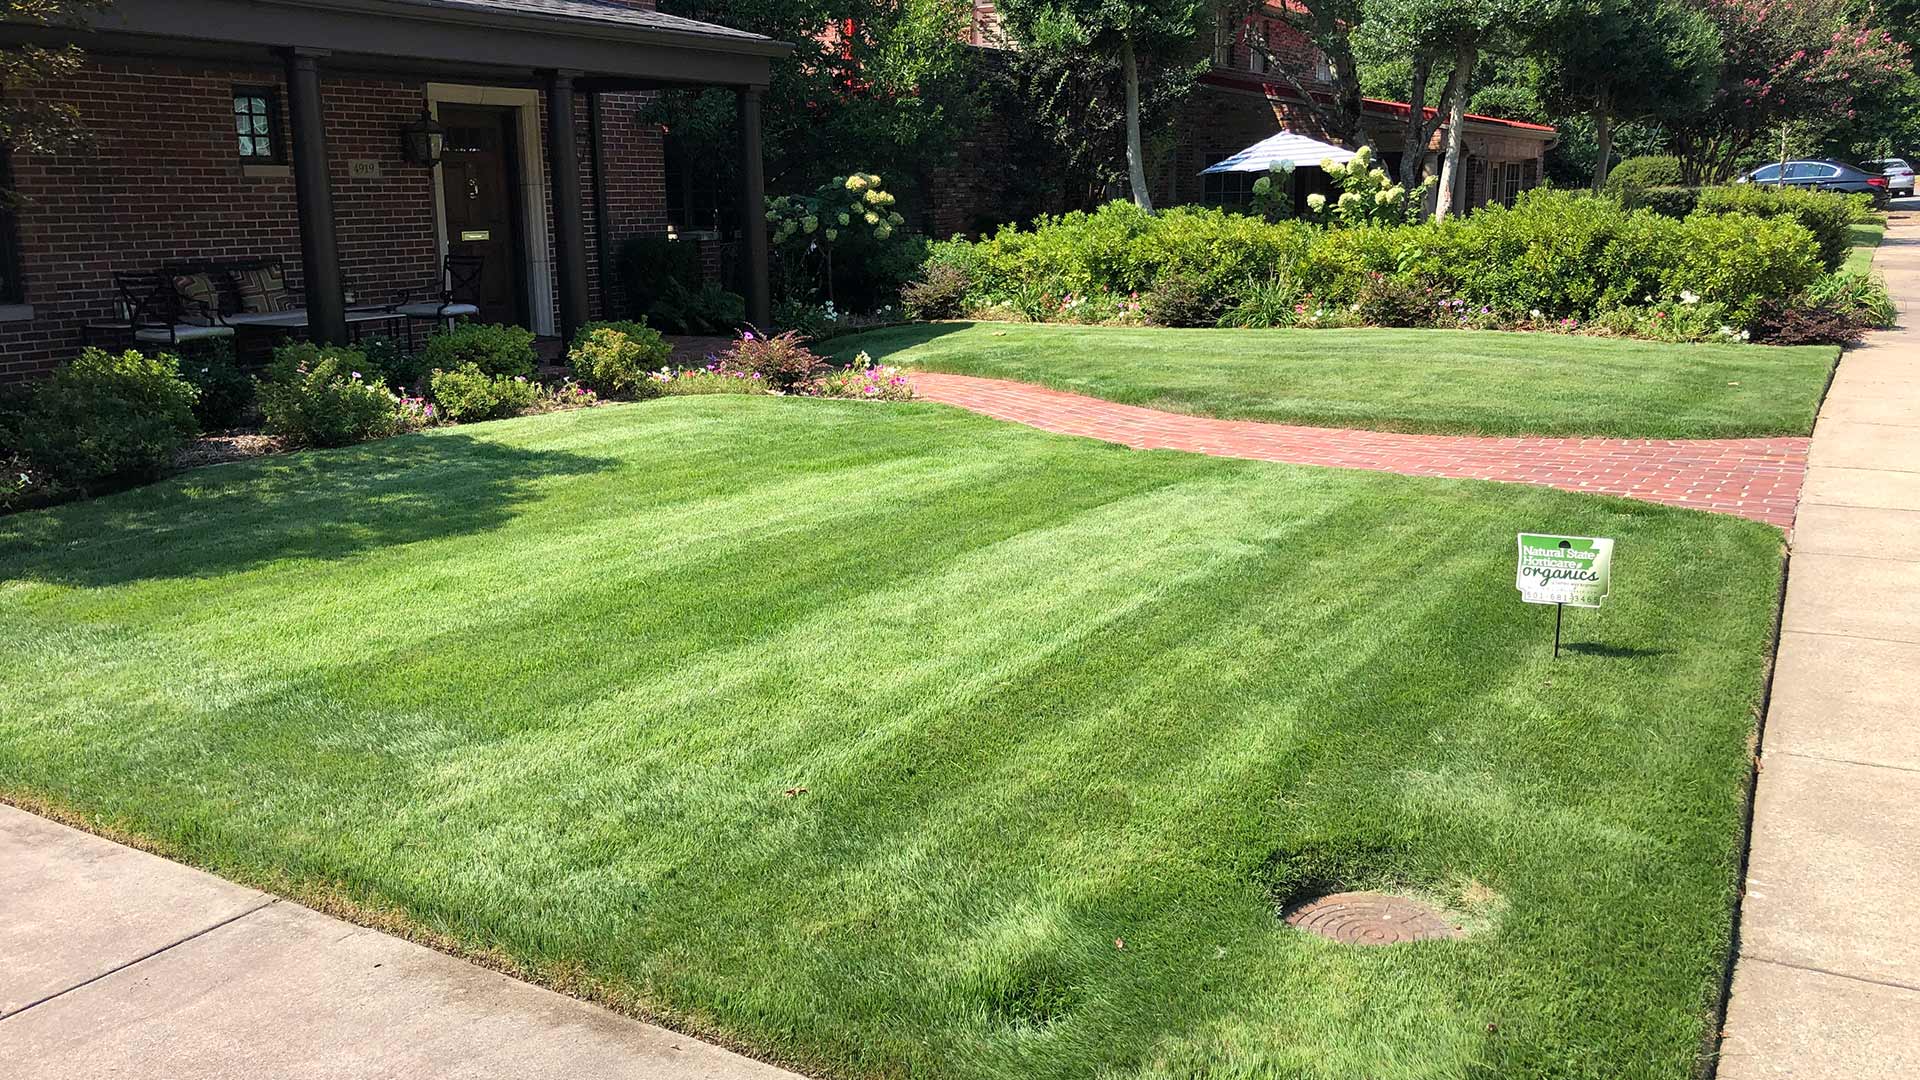 Beautiful home lawn at a property in North Little Rock, AR.